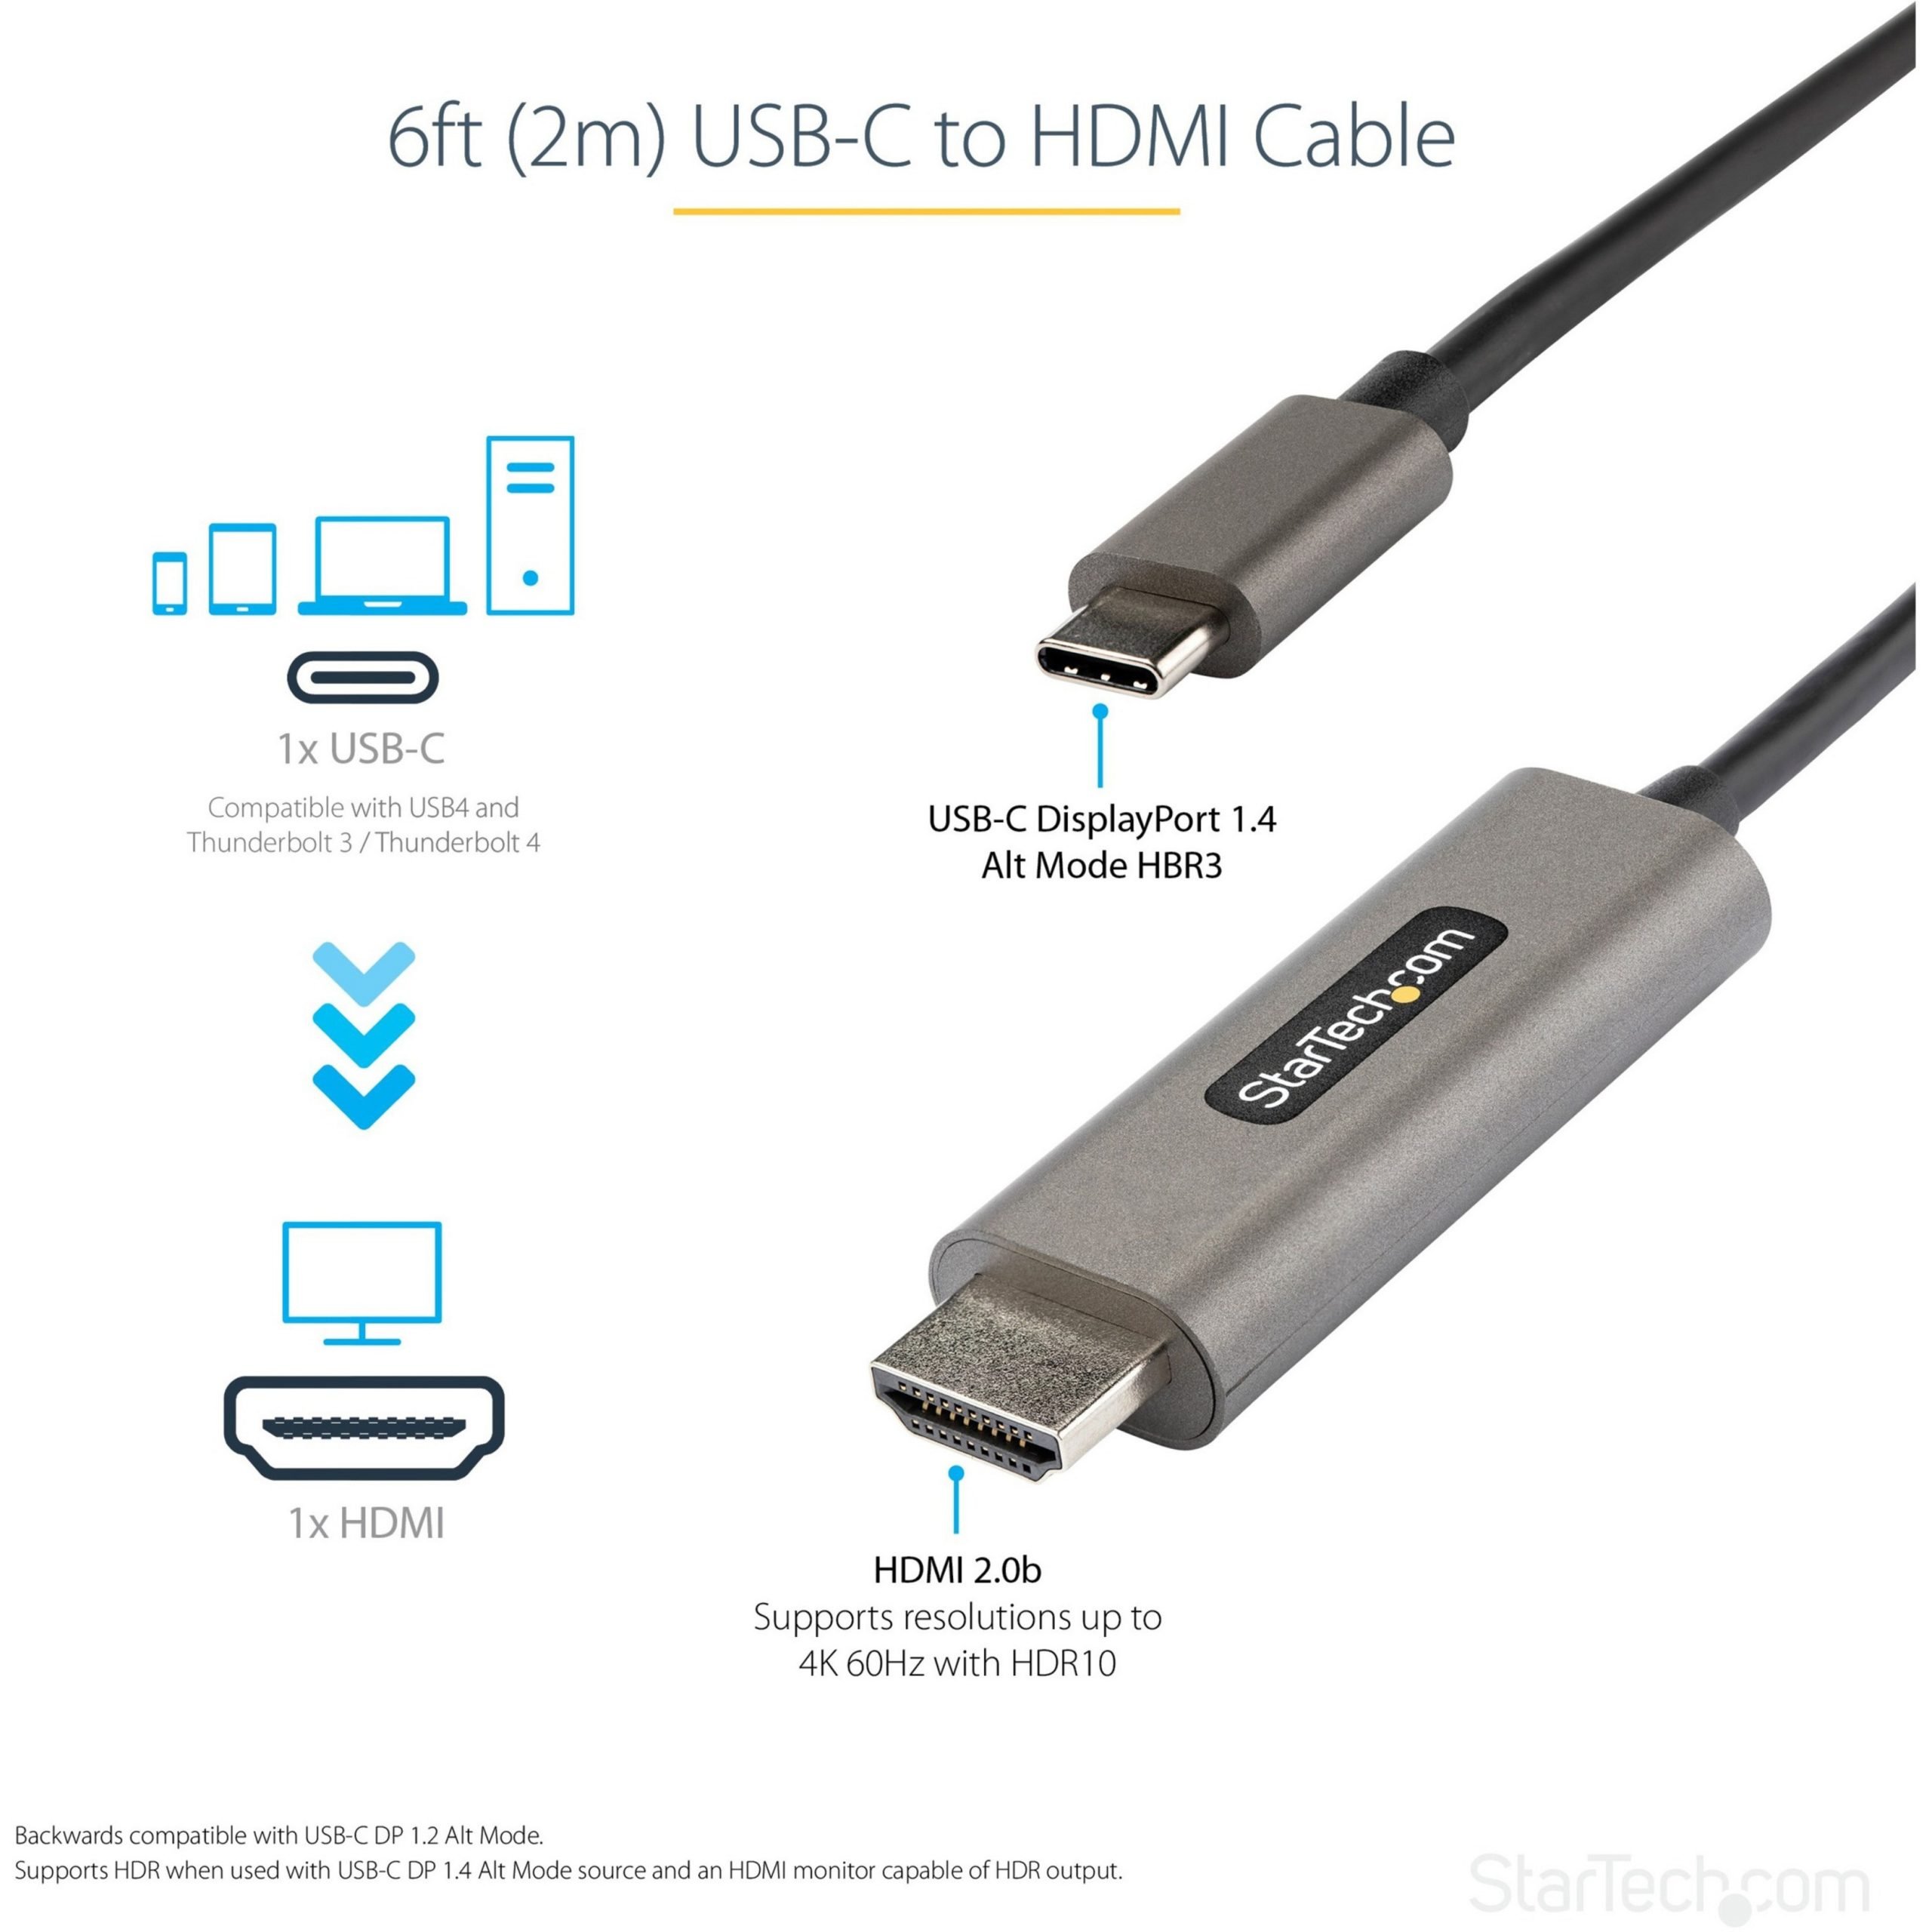 Startech .com 6ft (2m) C to HDMI Cable 4K 60Hz with HDR10, HD USB Type-C to HDMI 2.0b Adapter Cable, DP 1.4 Alt Mode HBR36... CDP2HDMM2MH - Corporate Armor